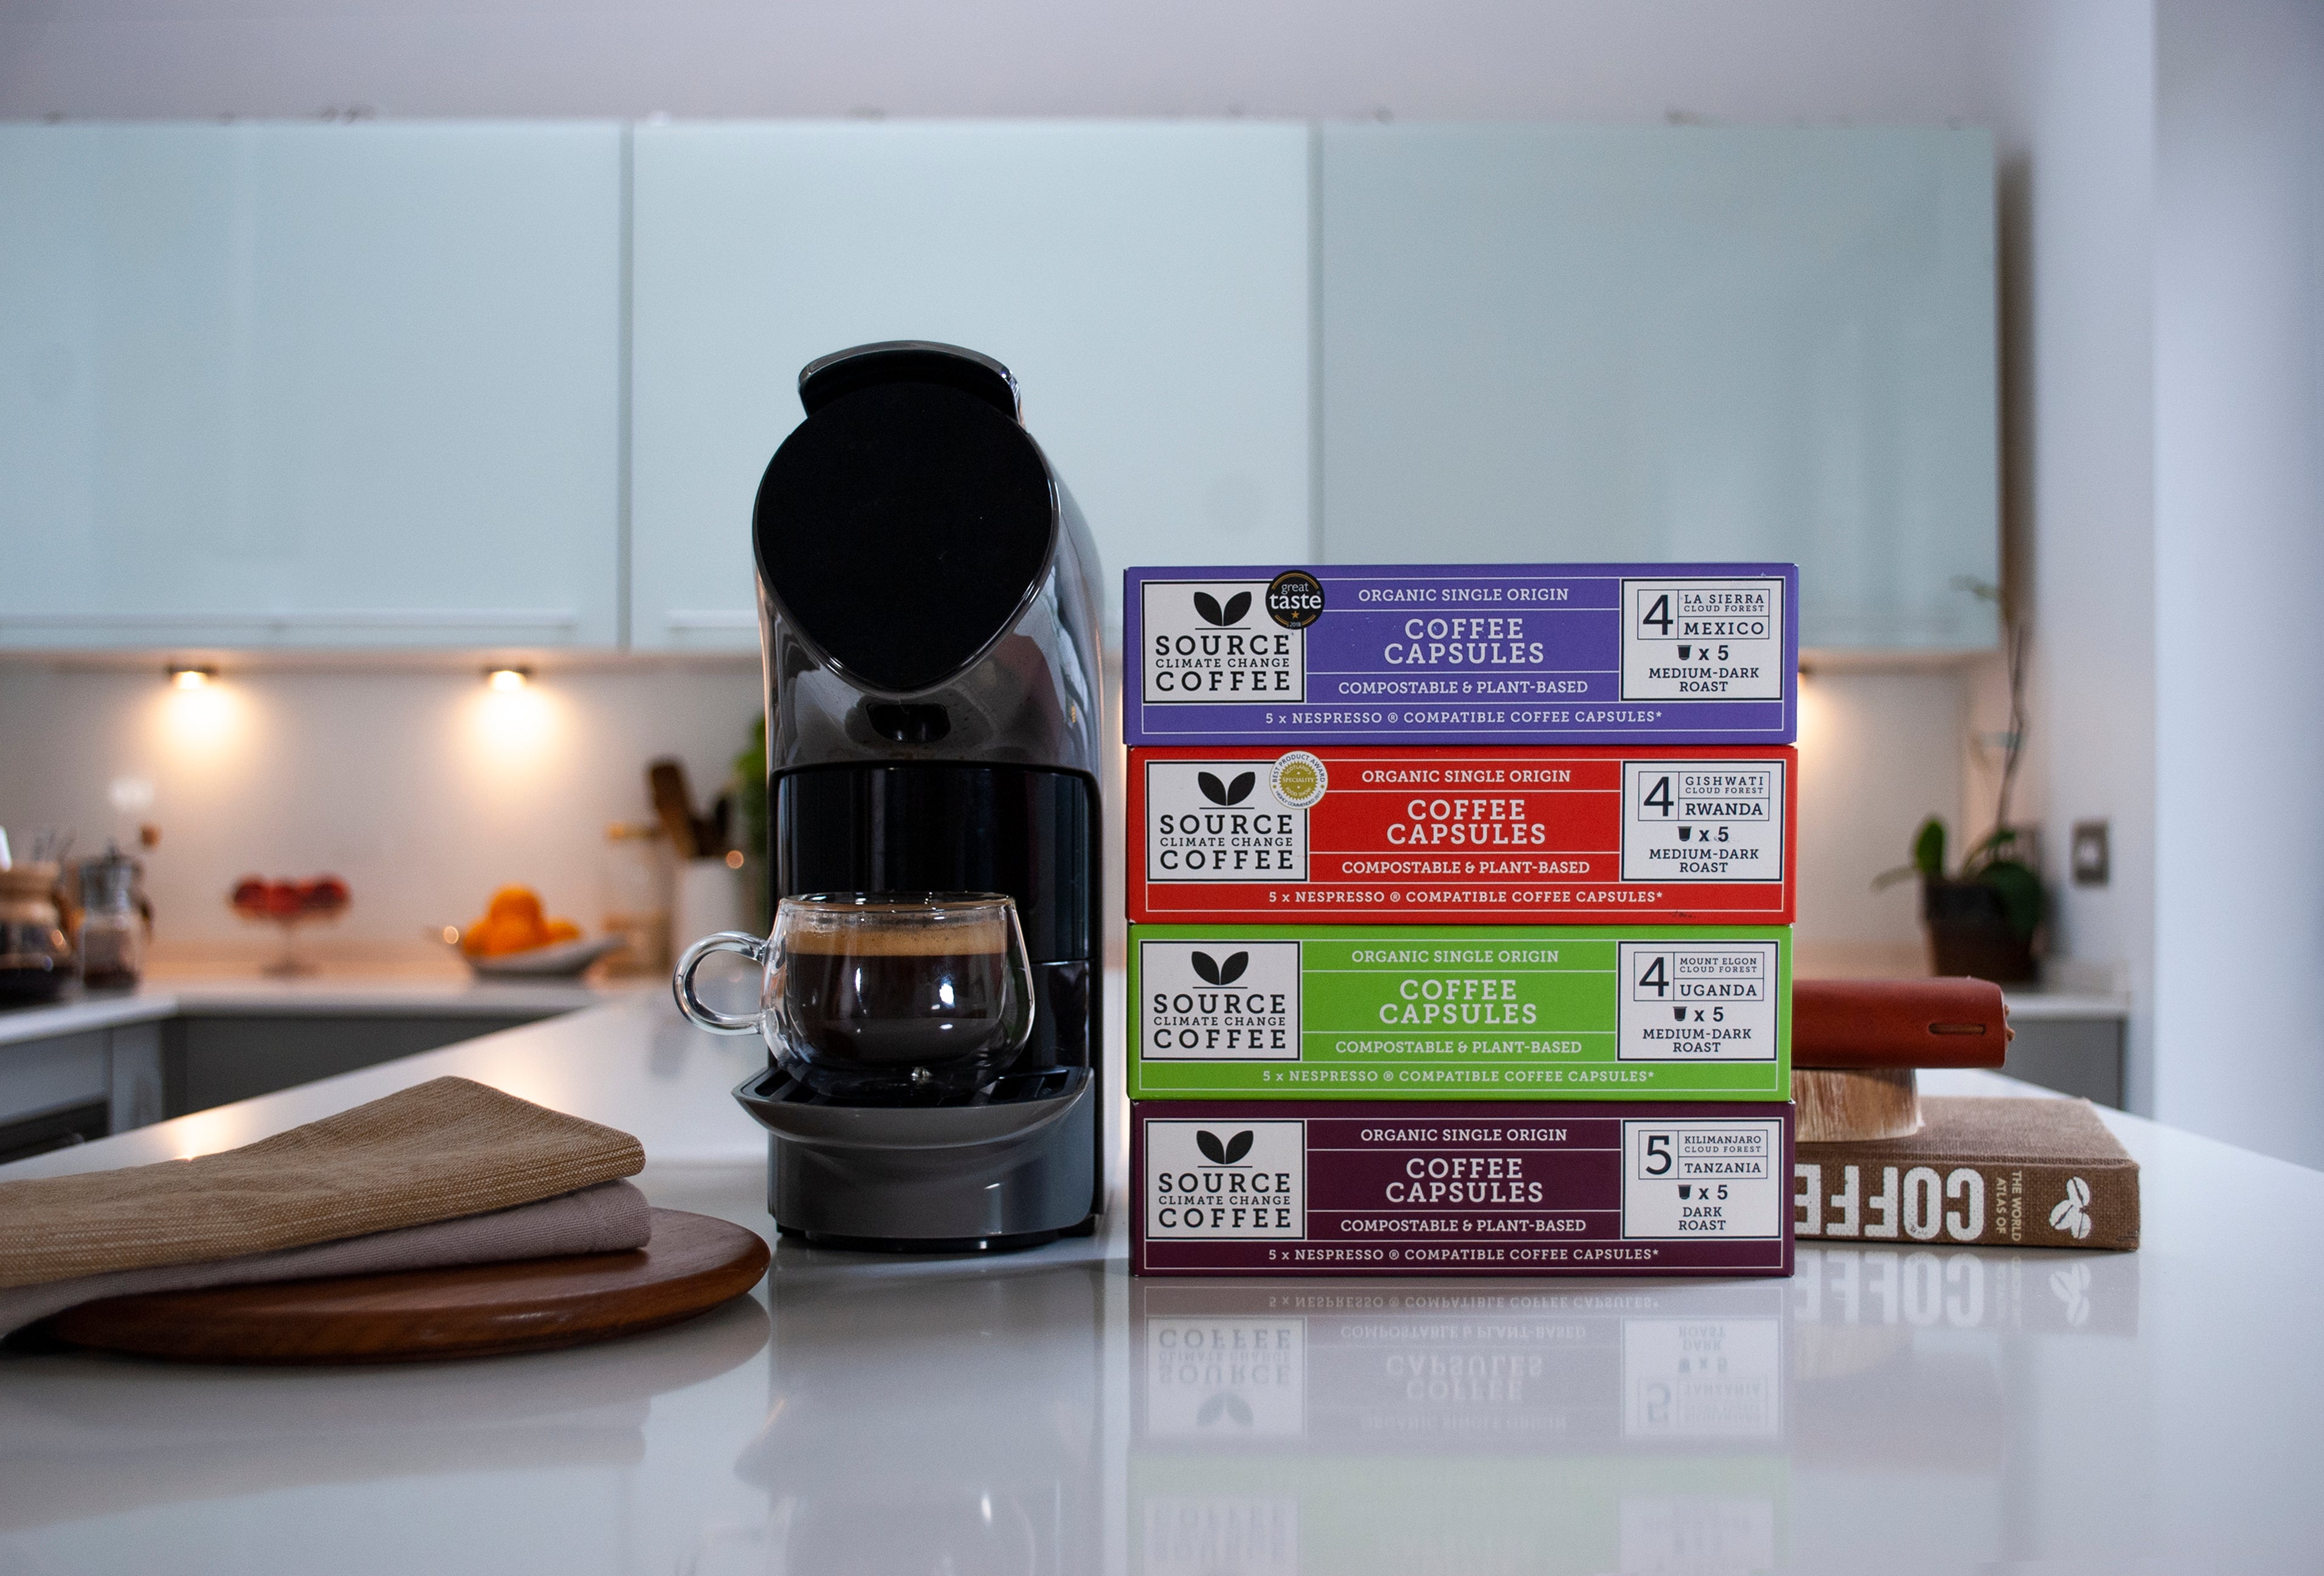 20 x Organic & Biodegradable Nespresso ® Capsules - Taste Collection - Source Climate Change Coffee